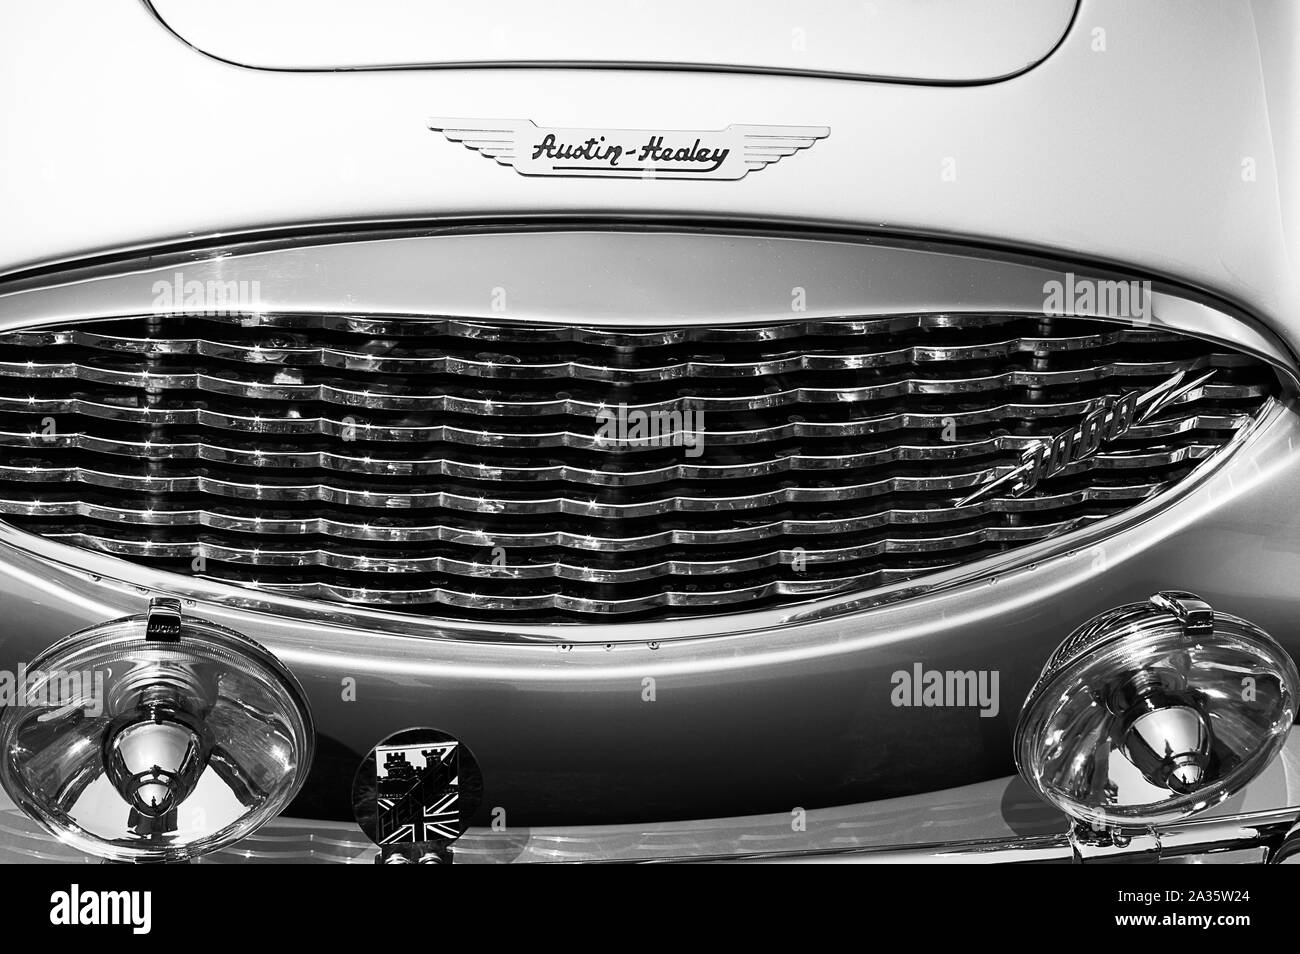 The front of a blue 1960 Austin Healey on display at a car show Stock Photo